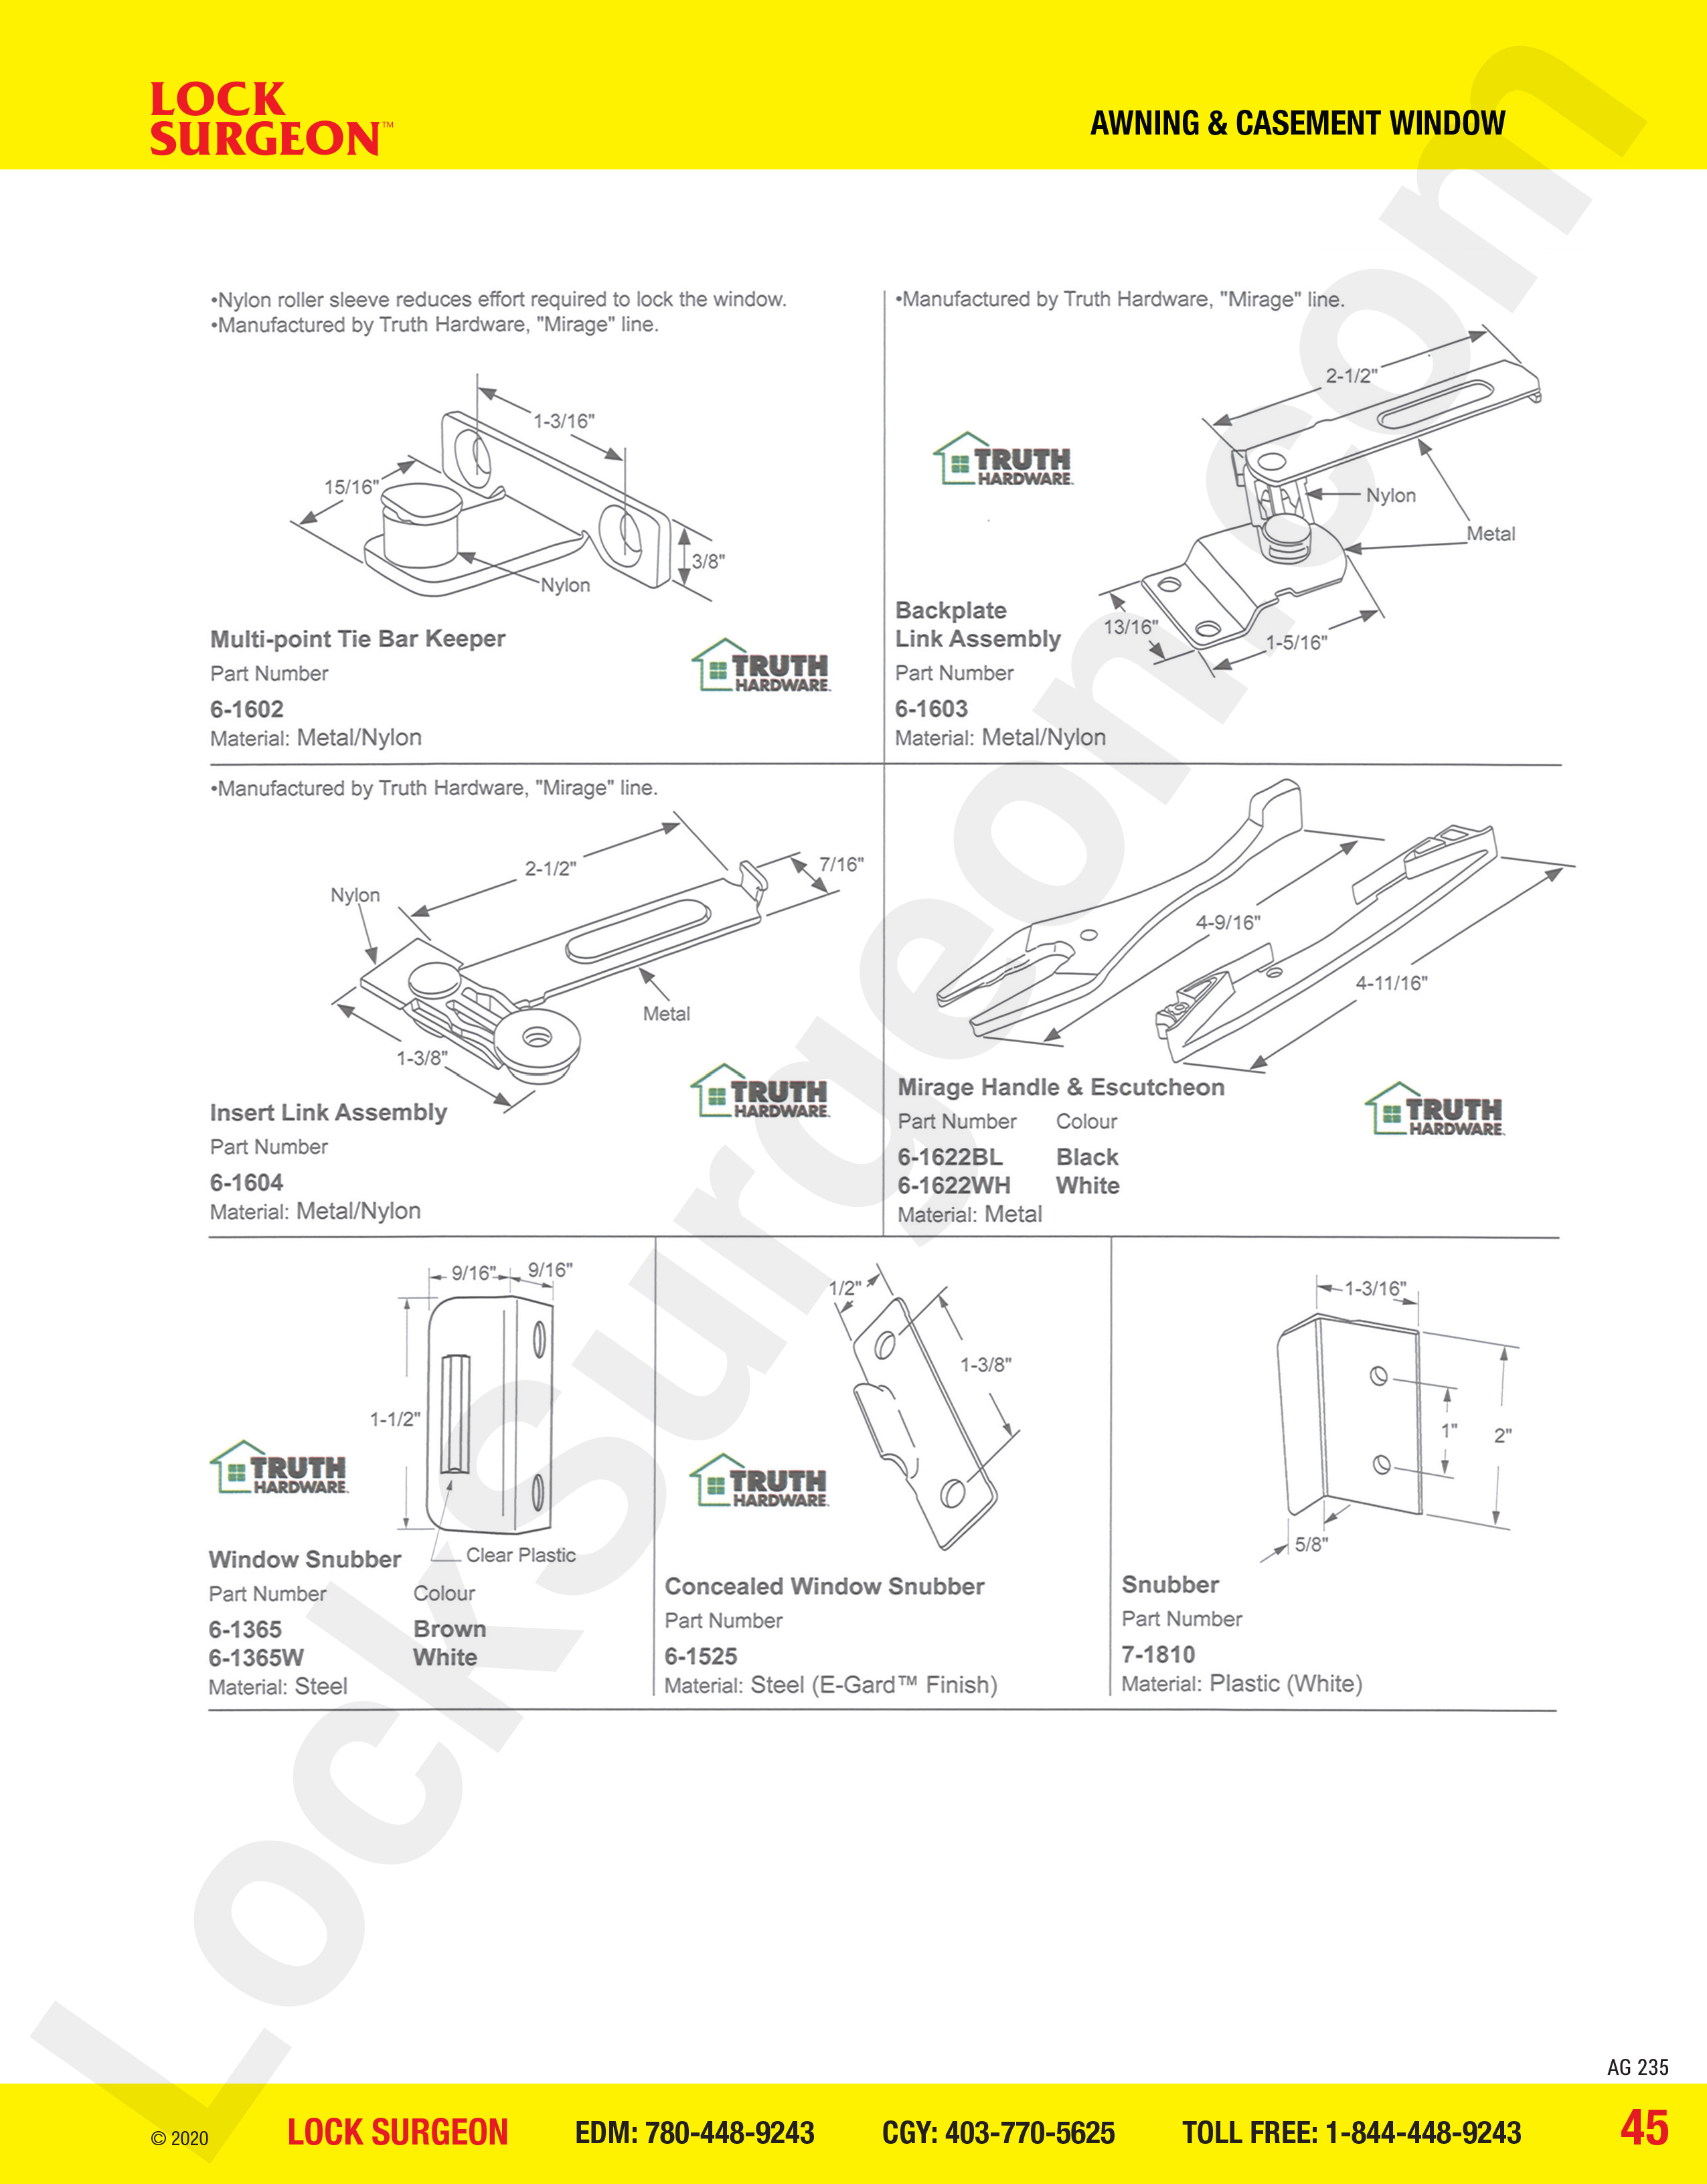 awning and casement window parts for snubbers.